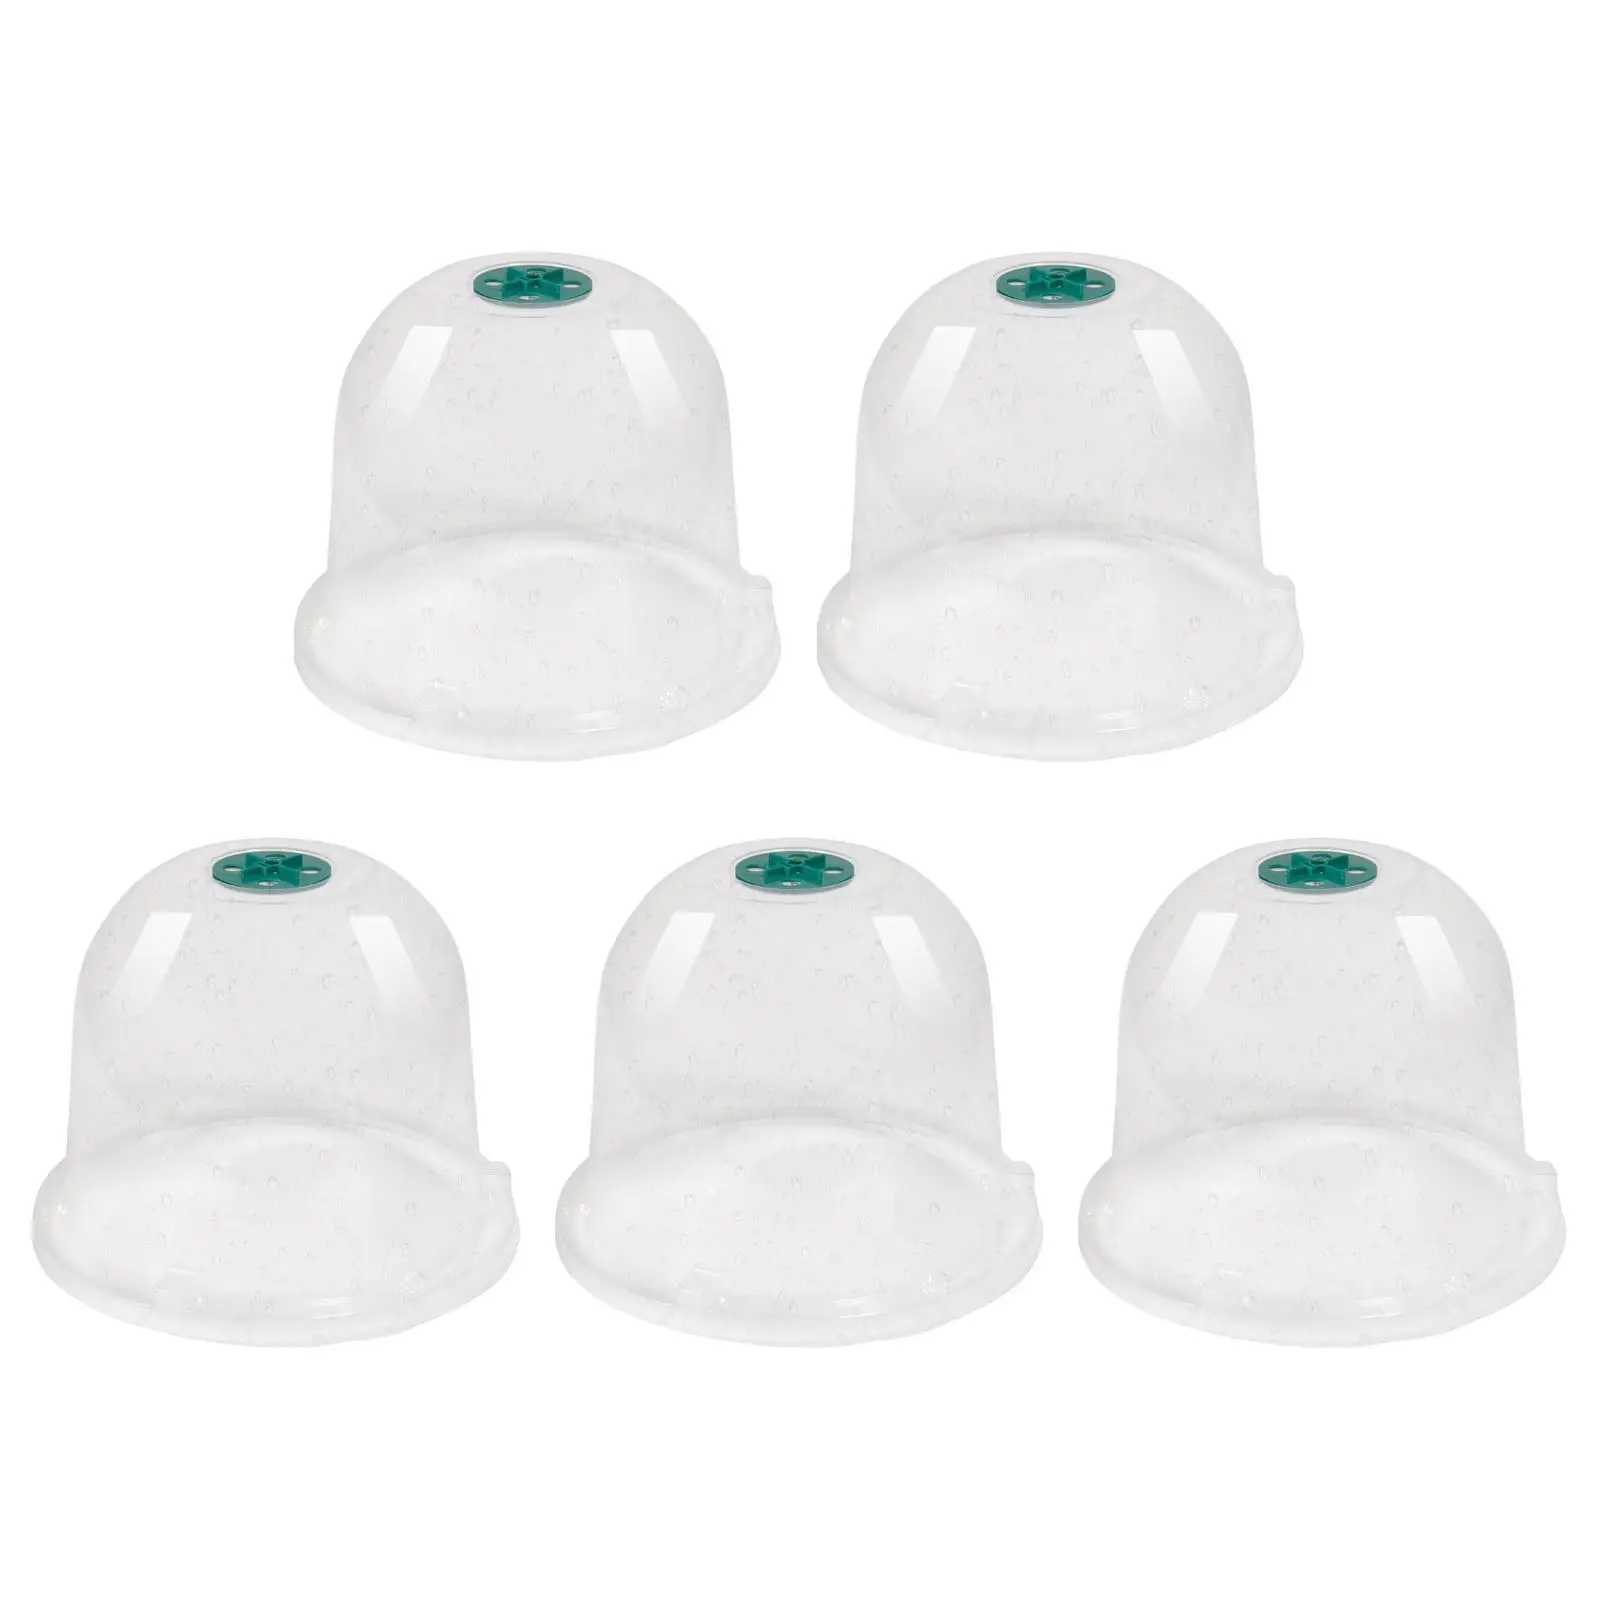 5x Warm Covers with Lights Breathable Multipurpose Rotatable Switch Seedling